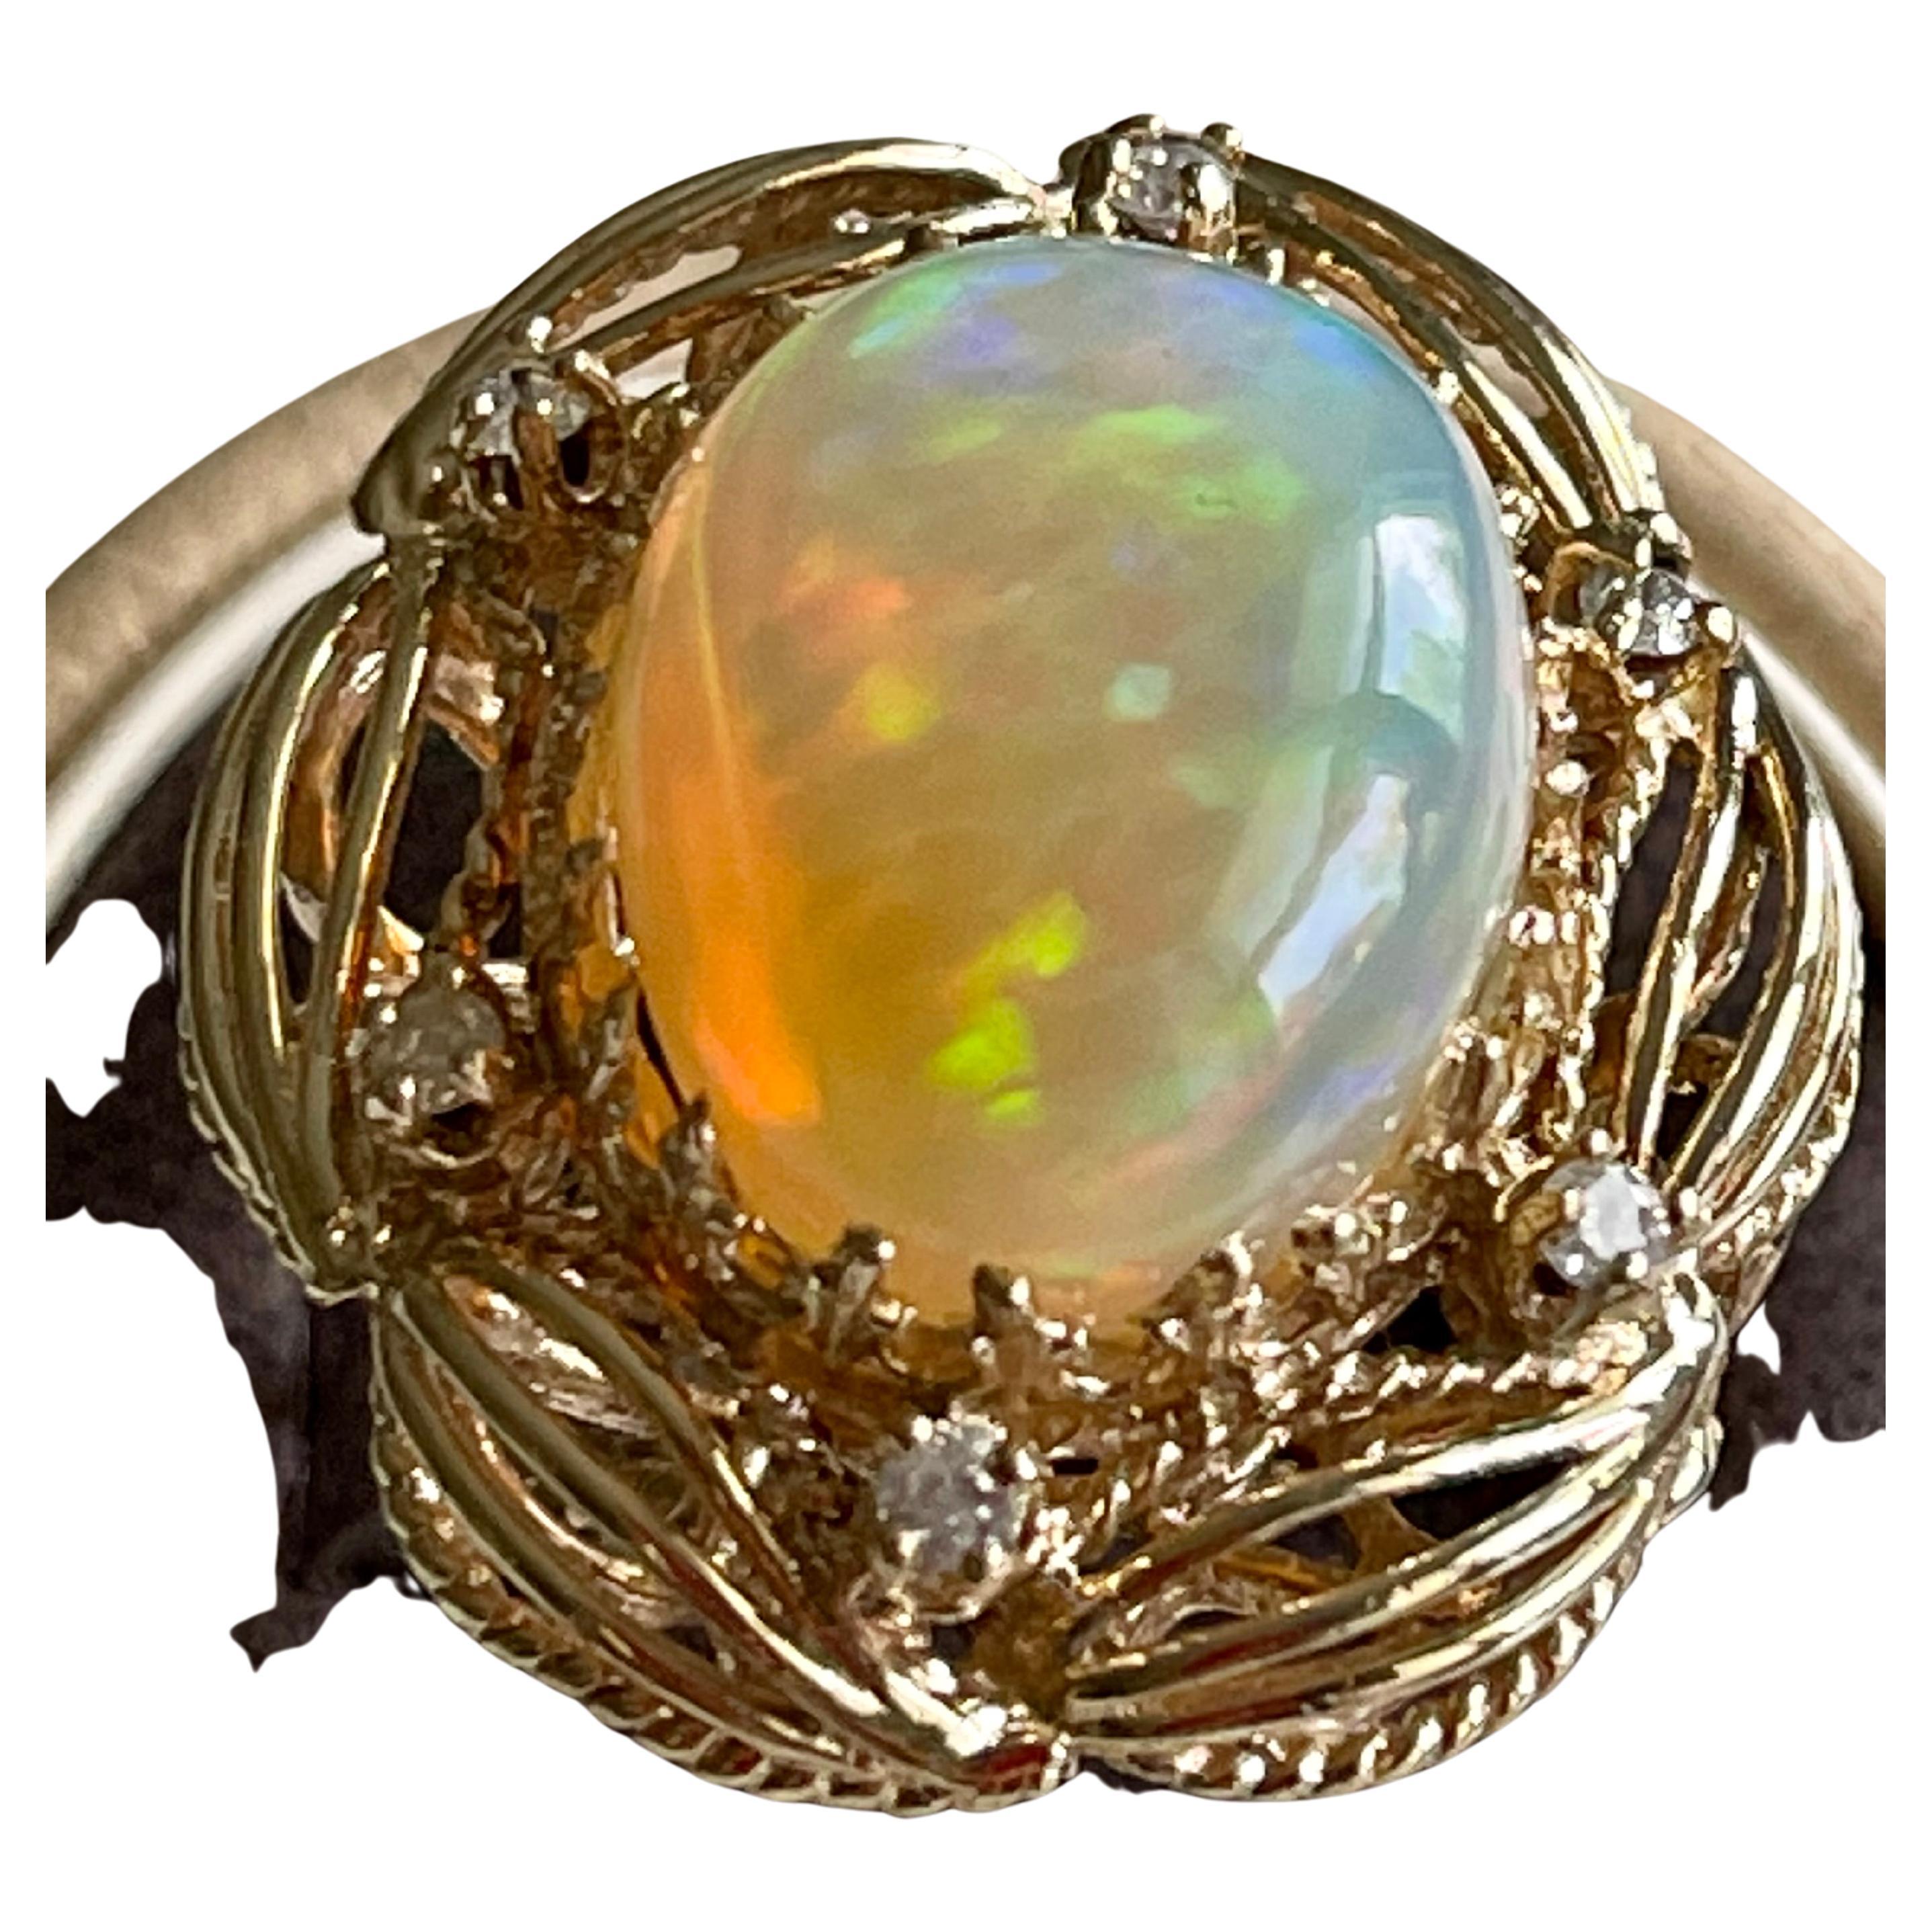 A Huge Cocktail ring 
Approximately 15 Carat Oval Ethiopian Opal  & Diamond Ring 14 Karat Yellow Gold Size 8
This spectacular Ring consisting of a single Oval Shape Ethiopian Opal Approximately 15 Carat. 

very clean Stone no inclusion , full of